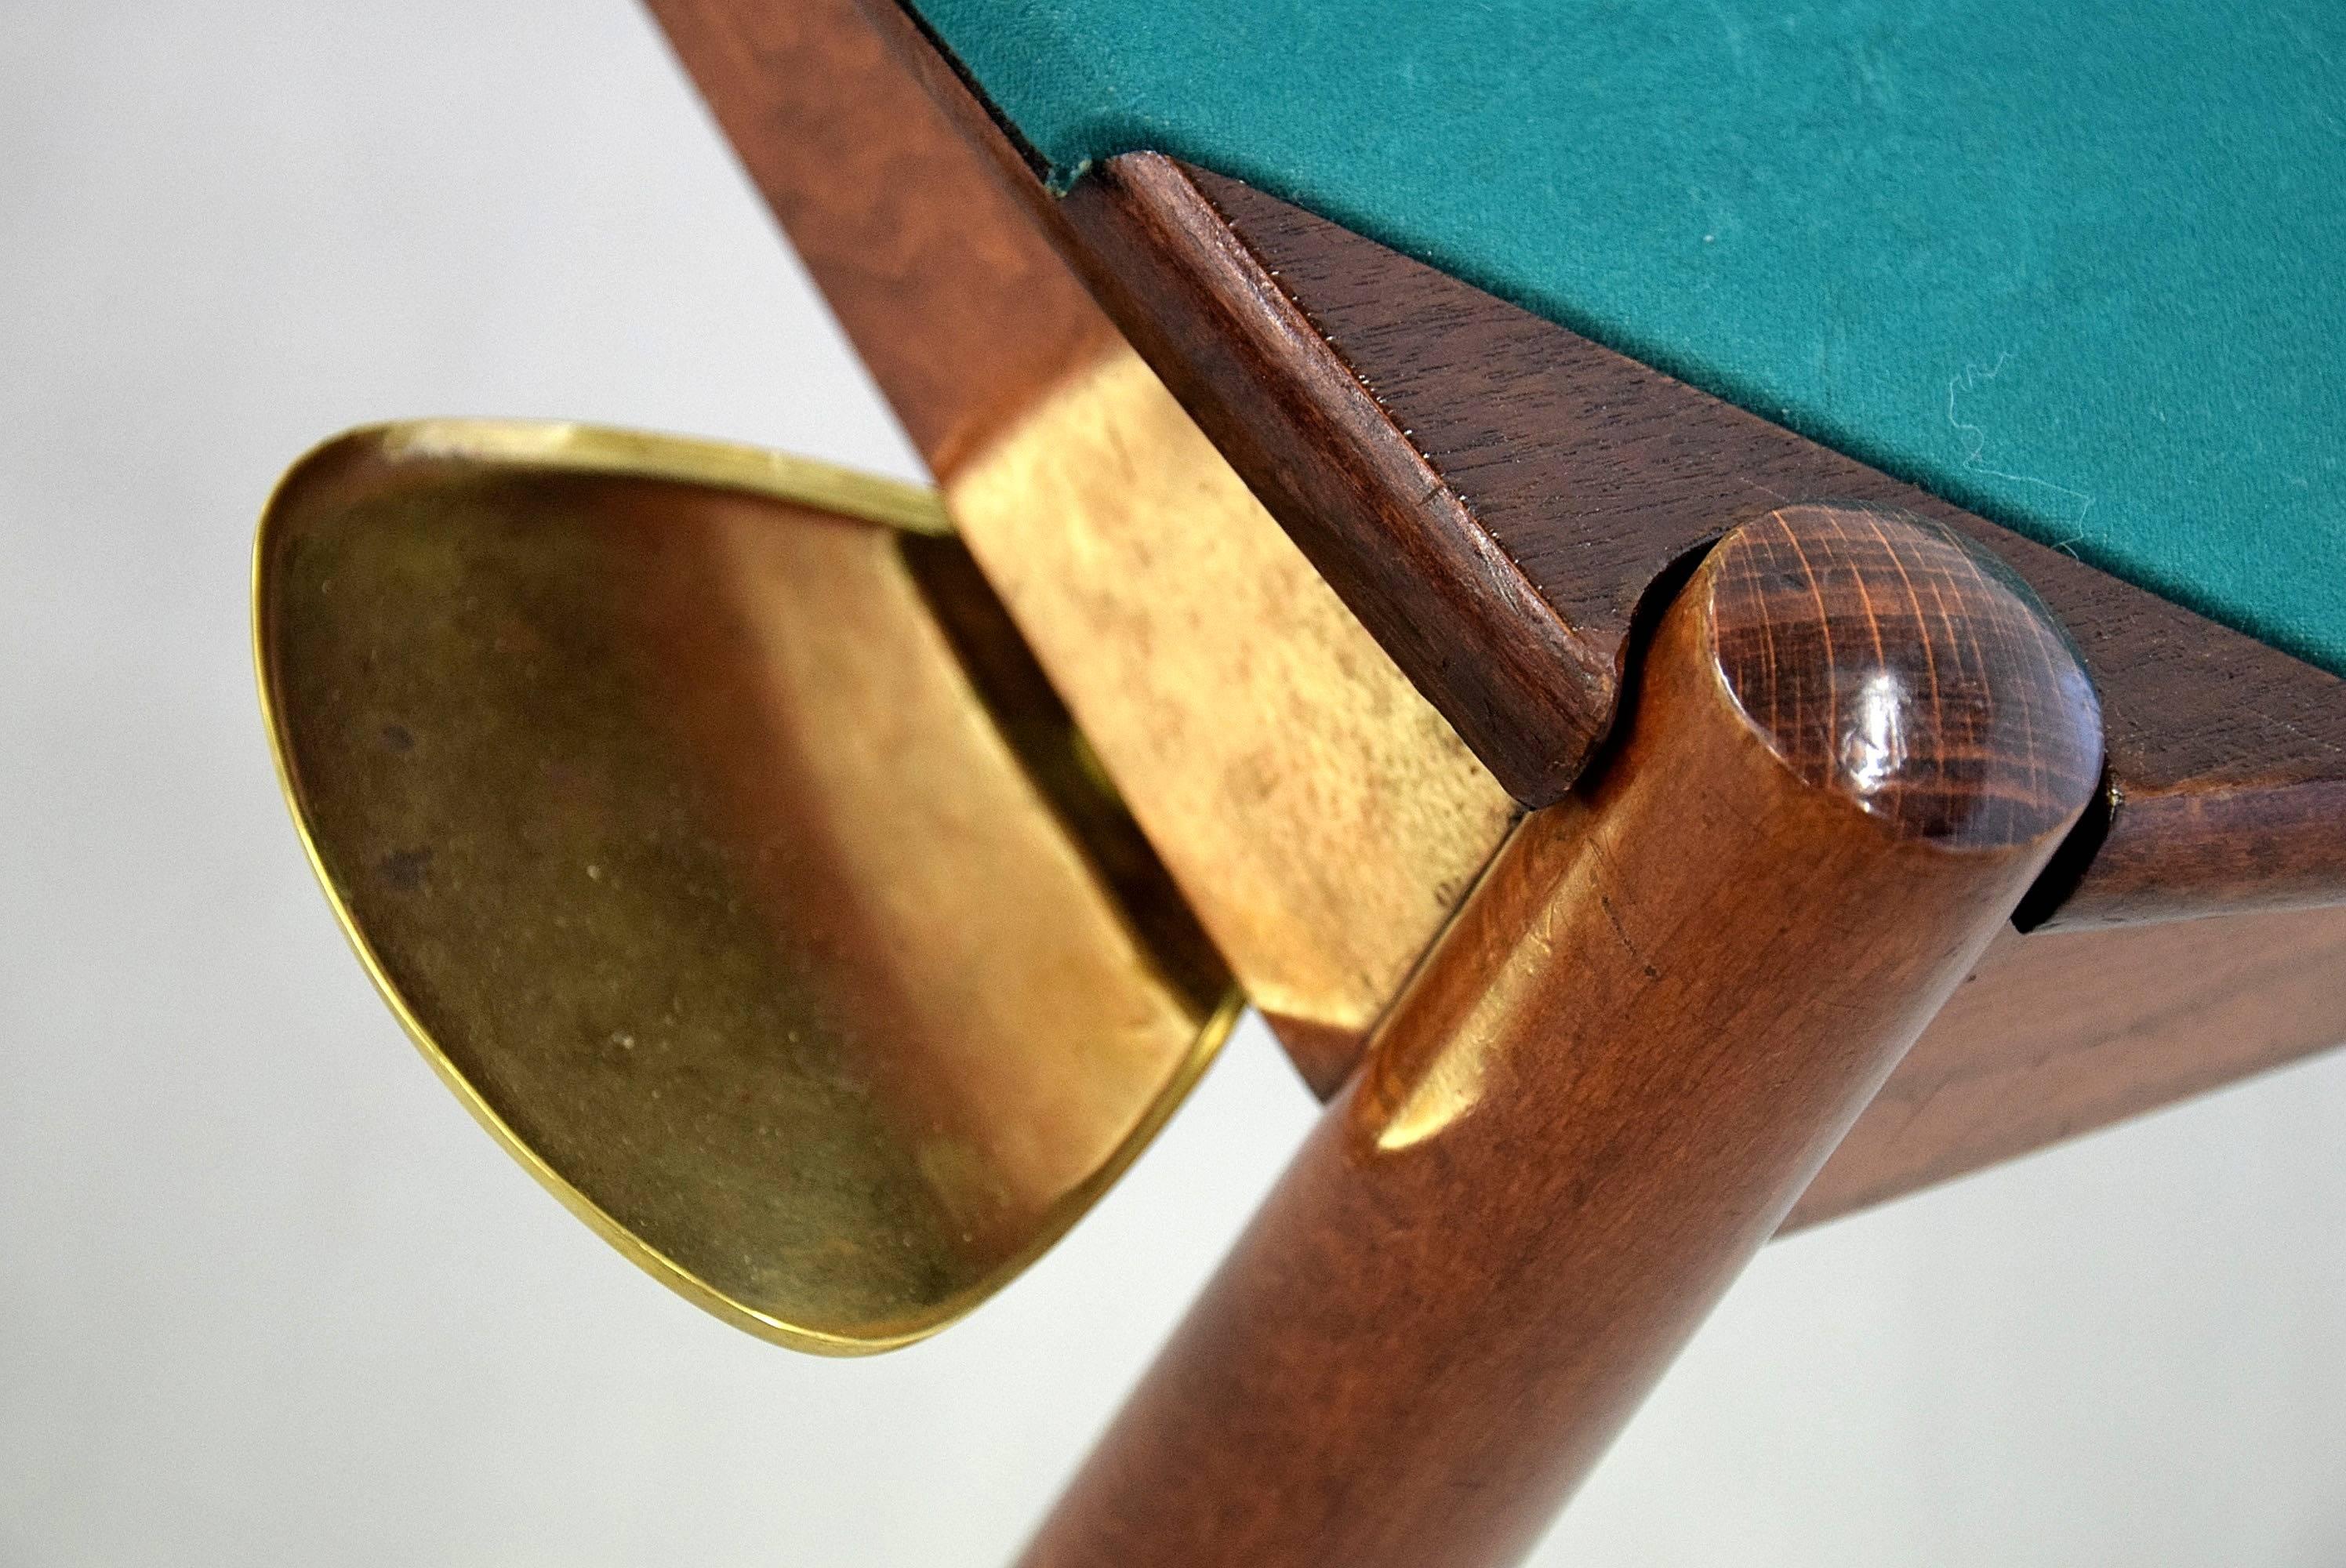 The most famous poker table in the world, designed by Gio Ponti and produced by the Fratelli Reguitti in the 1960s.

The top can be reversed to either the green felt or wooden top. Playing cards can be stored underneath.

On each corner brass